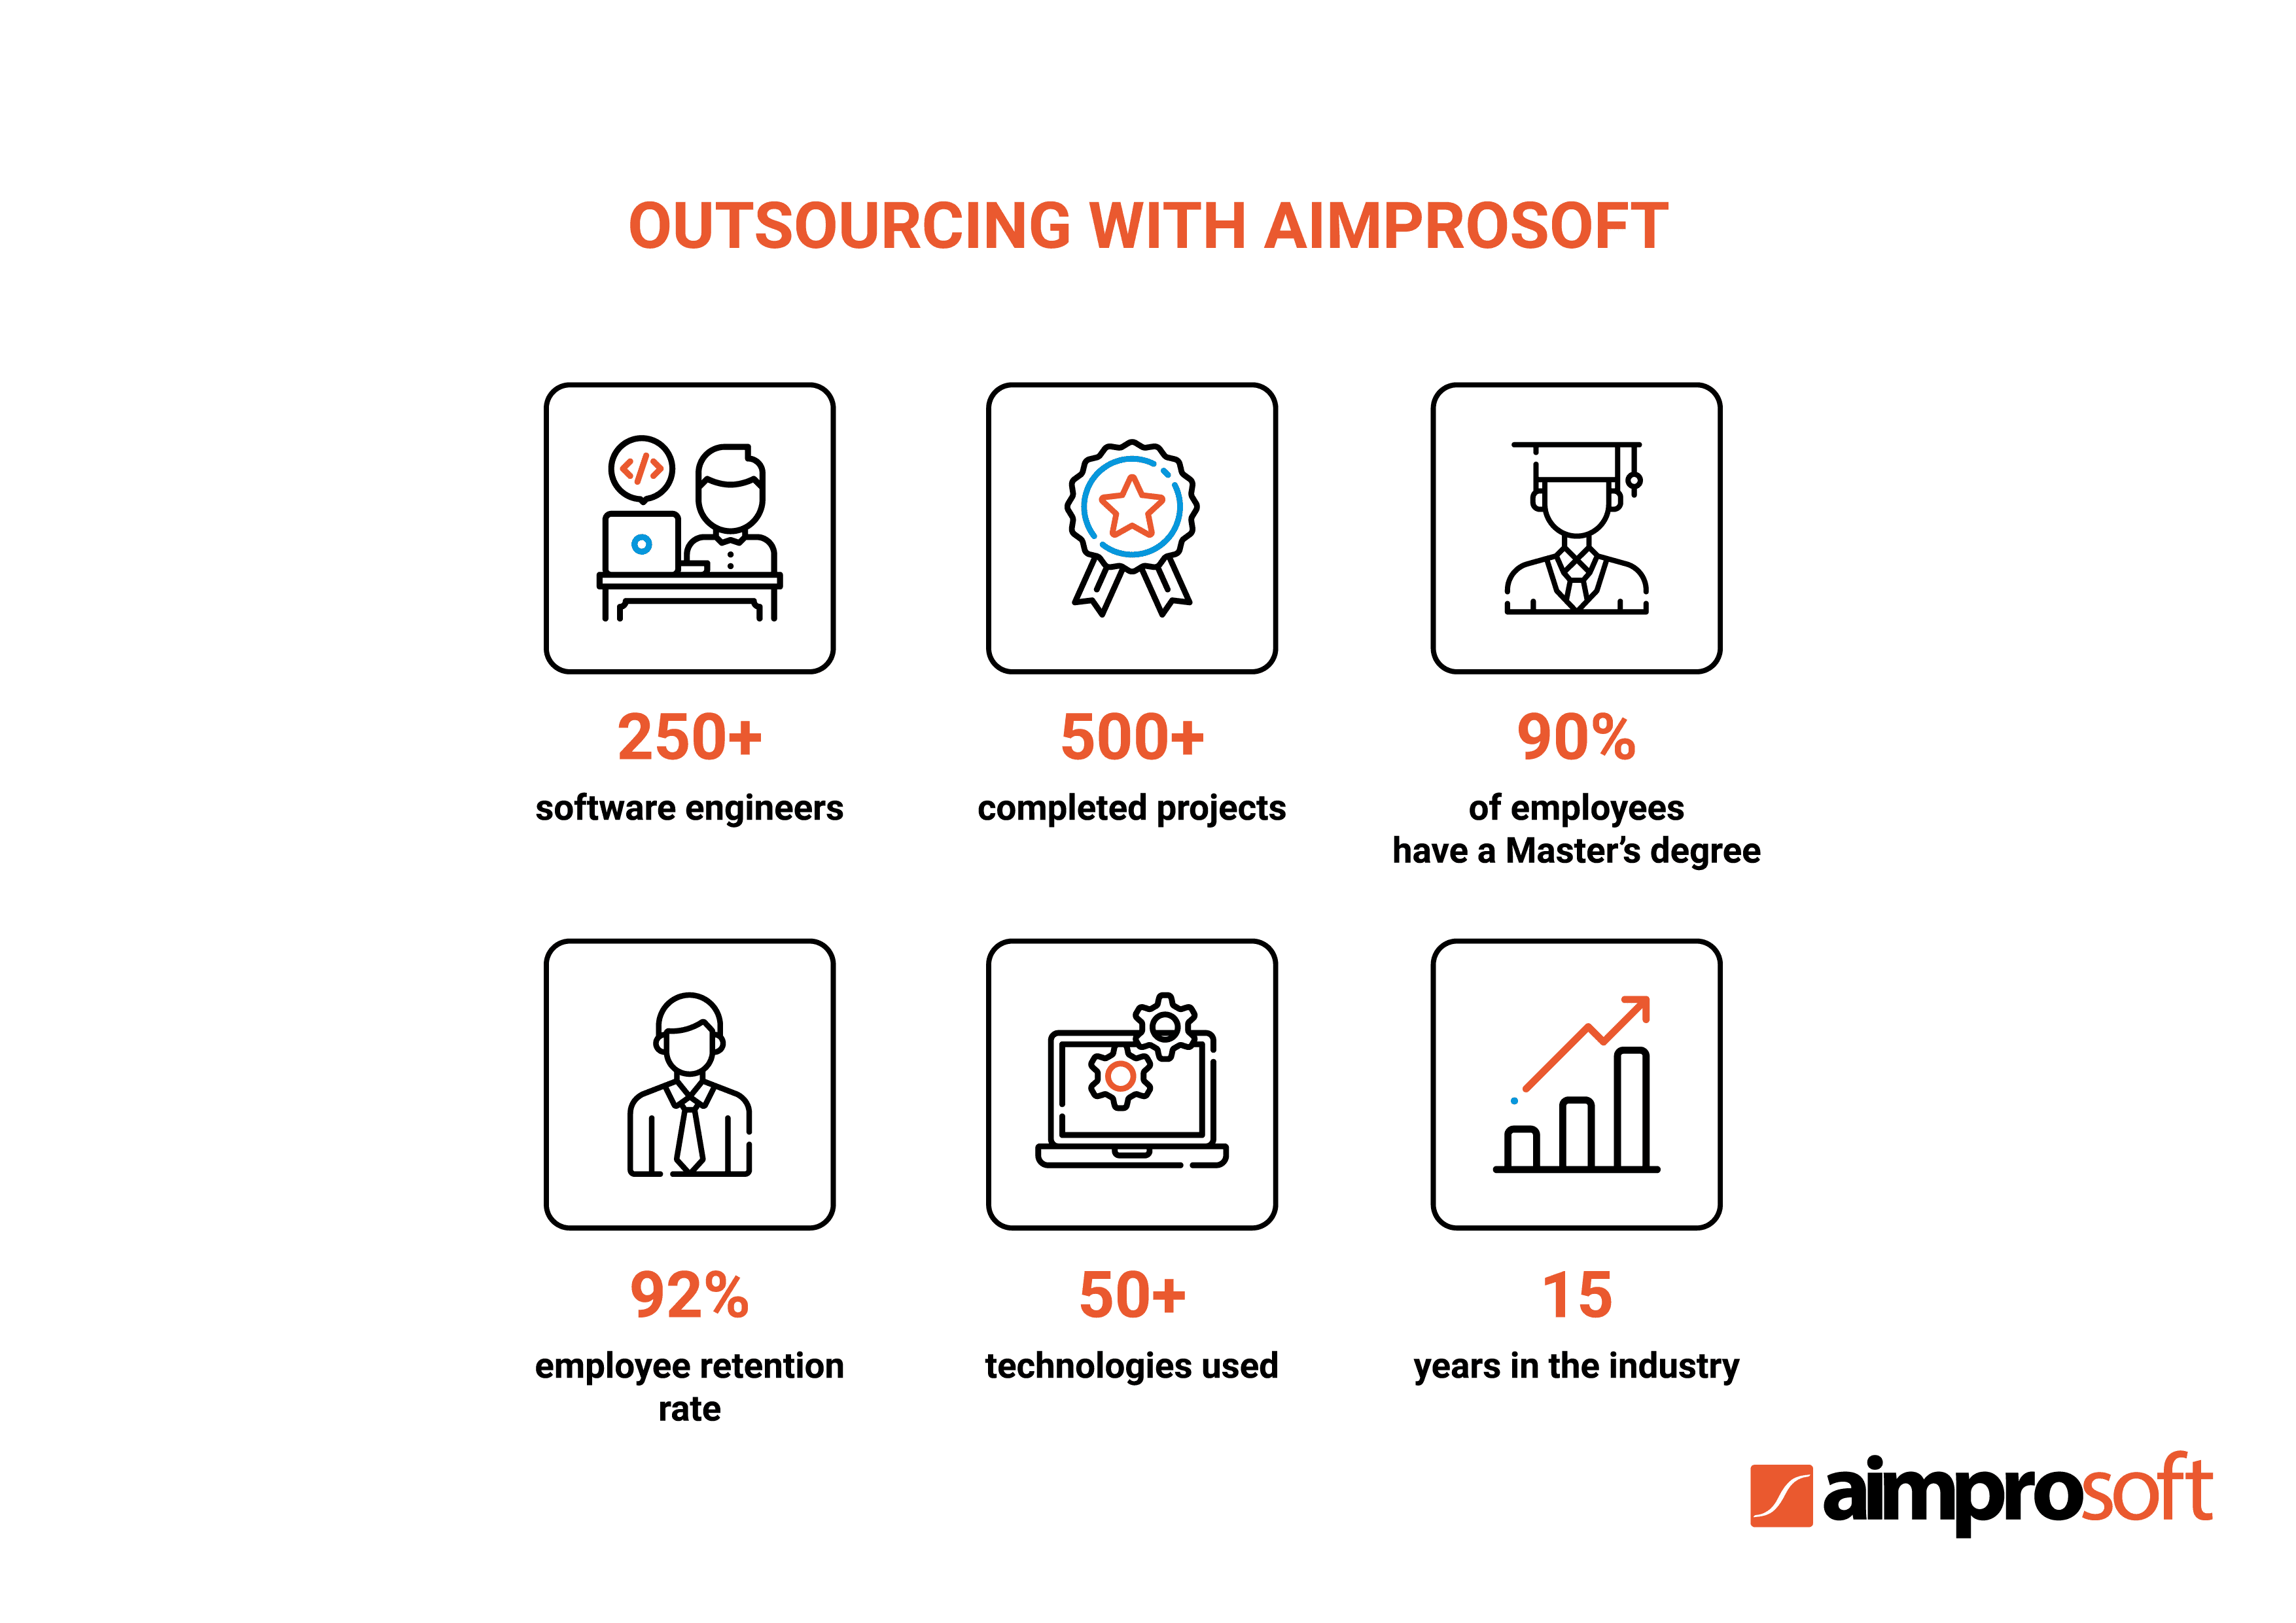  IT outsourcing with Aimprosoft 